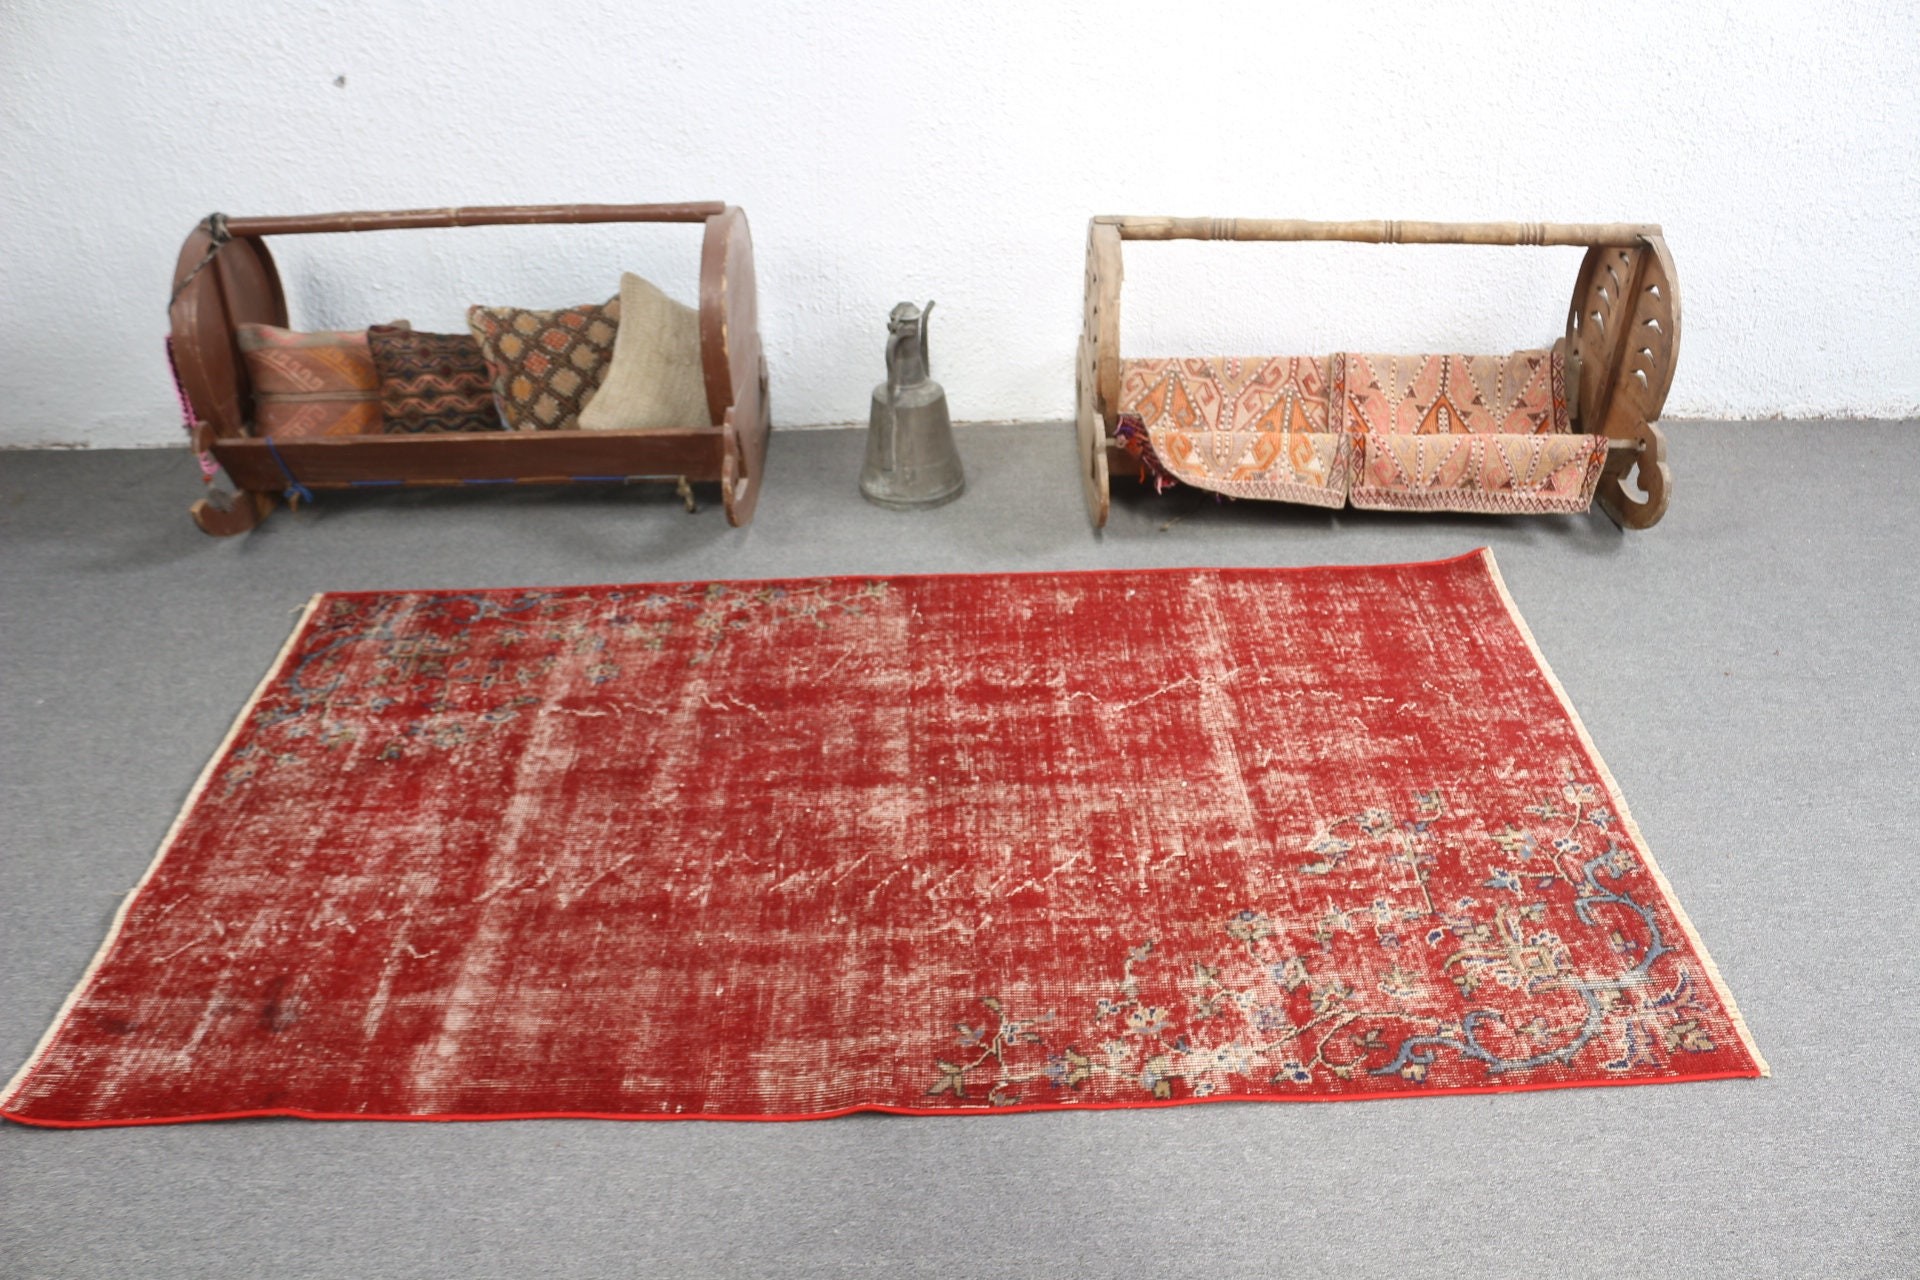 Red Cool Rugs, Vintage Rug, Retro Rug, Home Decor Rug, Pastel Rugs, Turkish Rug, Rugs for Living Room, Bedroom Rugs, 3.8x6.5 ft Area Rug